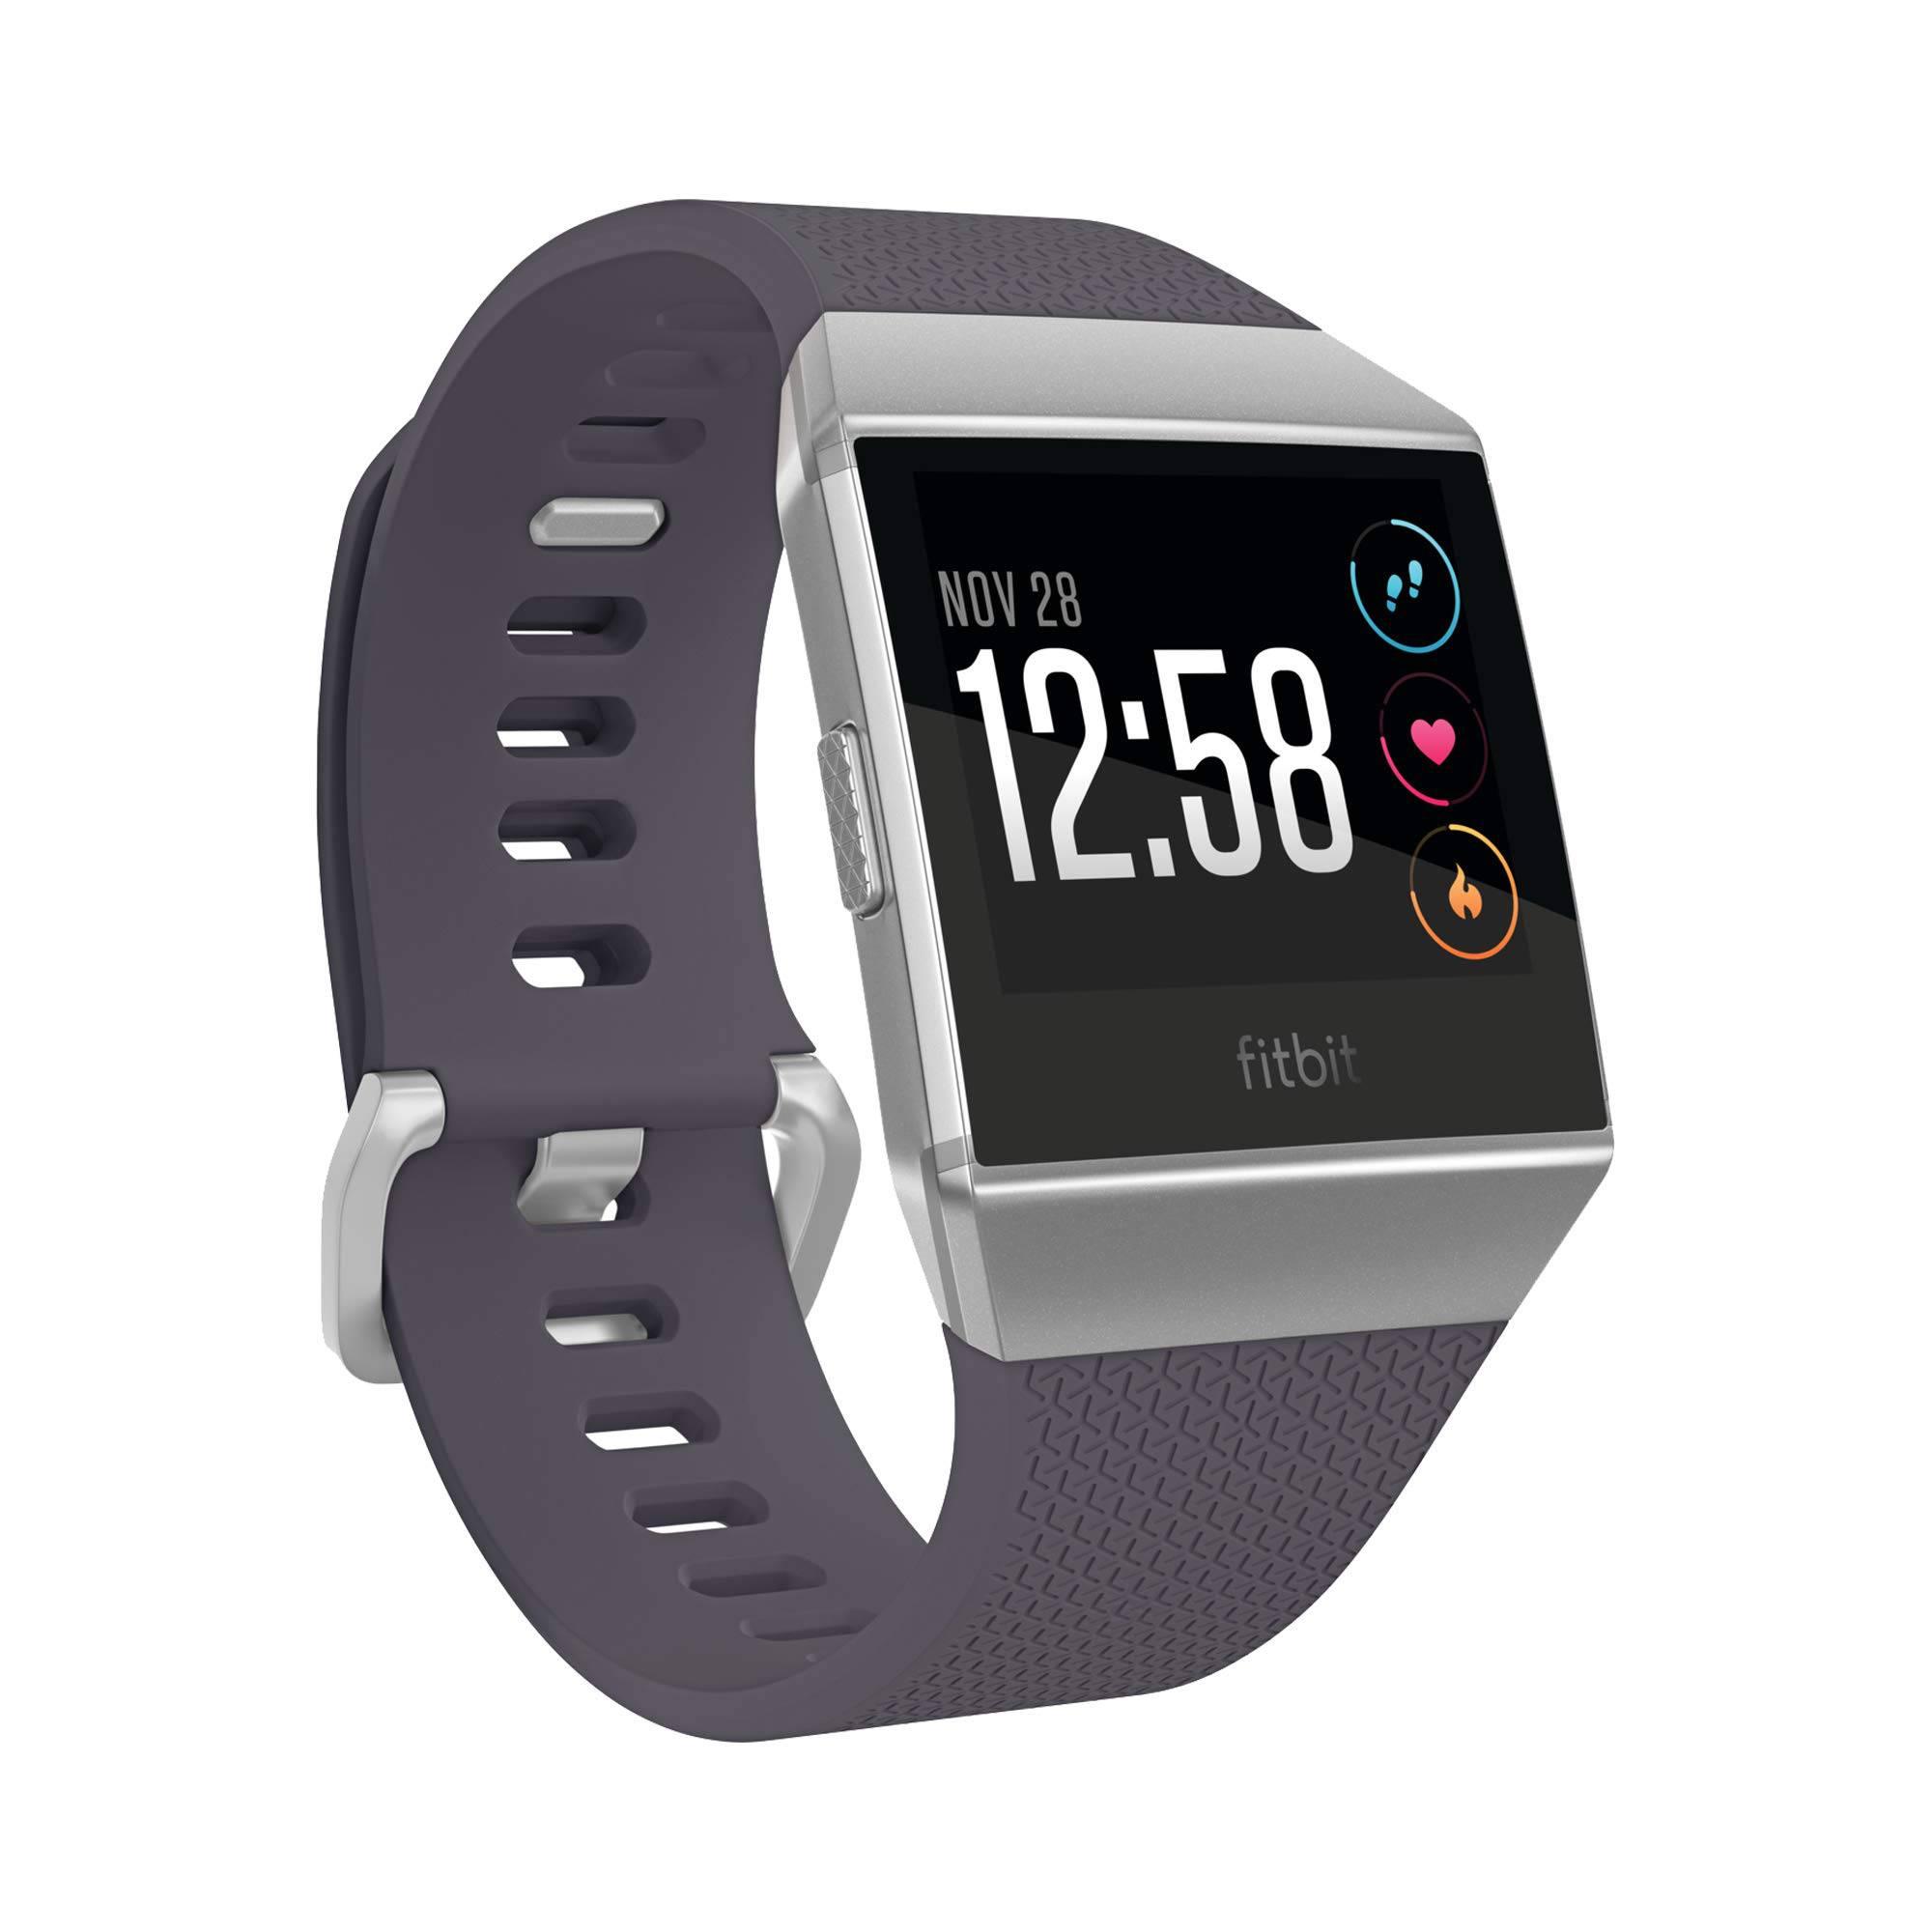 Fitbit Ionic - Smart homes - smartphone control